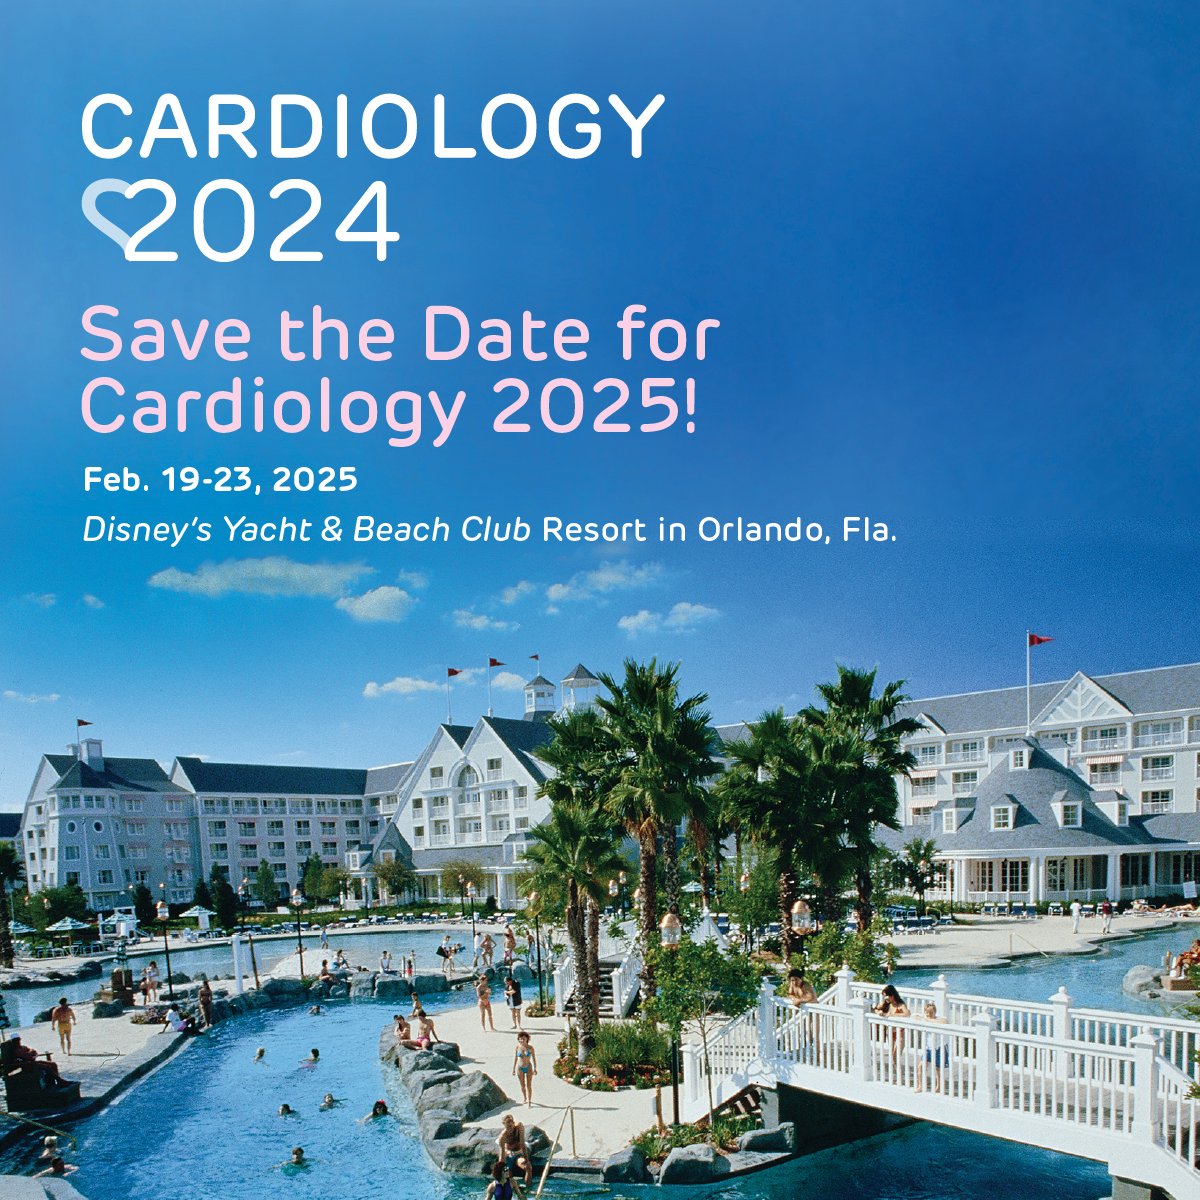 That’s a wrap on #Cardiology2024 – thank you to all of our attendees, sponsors and staff for another unforgettable meeting. Save the Date for #Cardiology2025 in Orlando – stay tuned for more details!